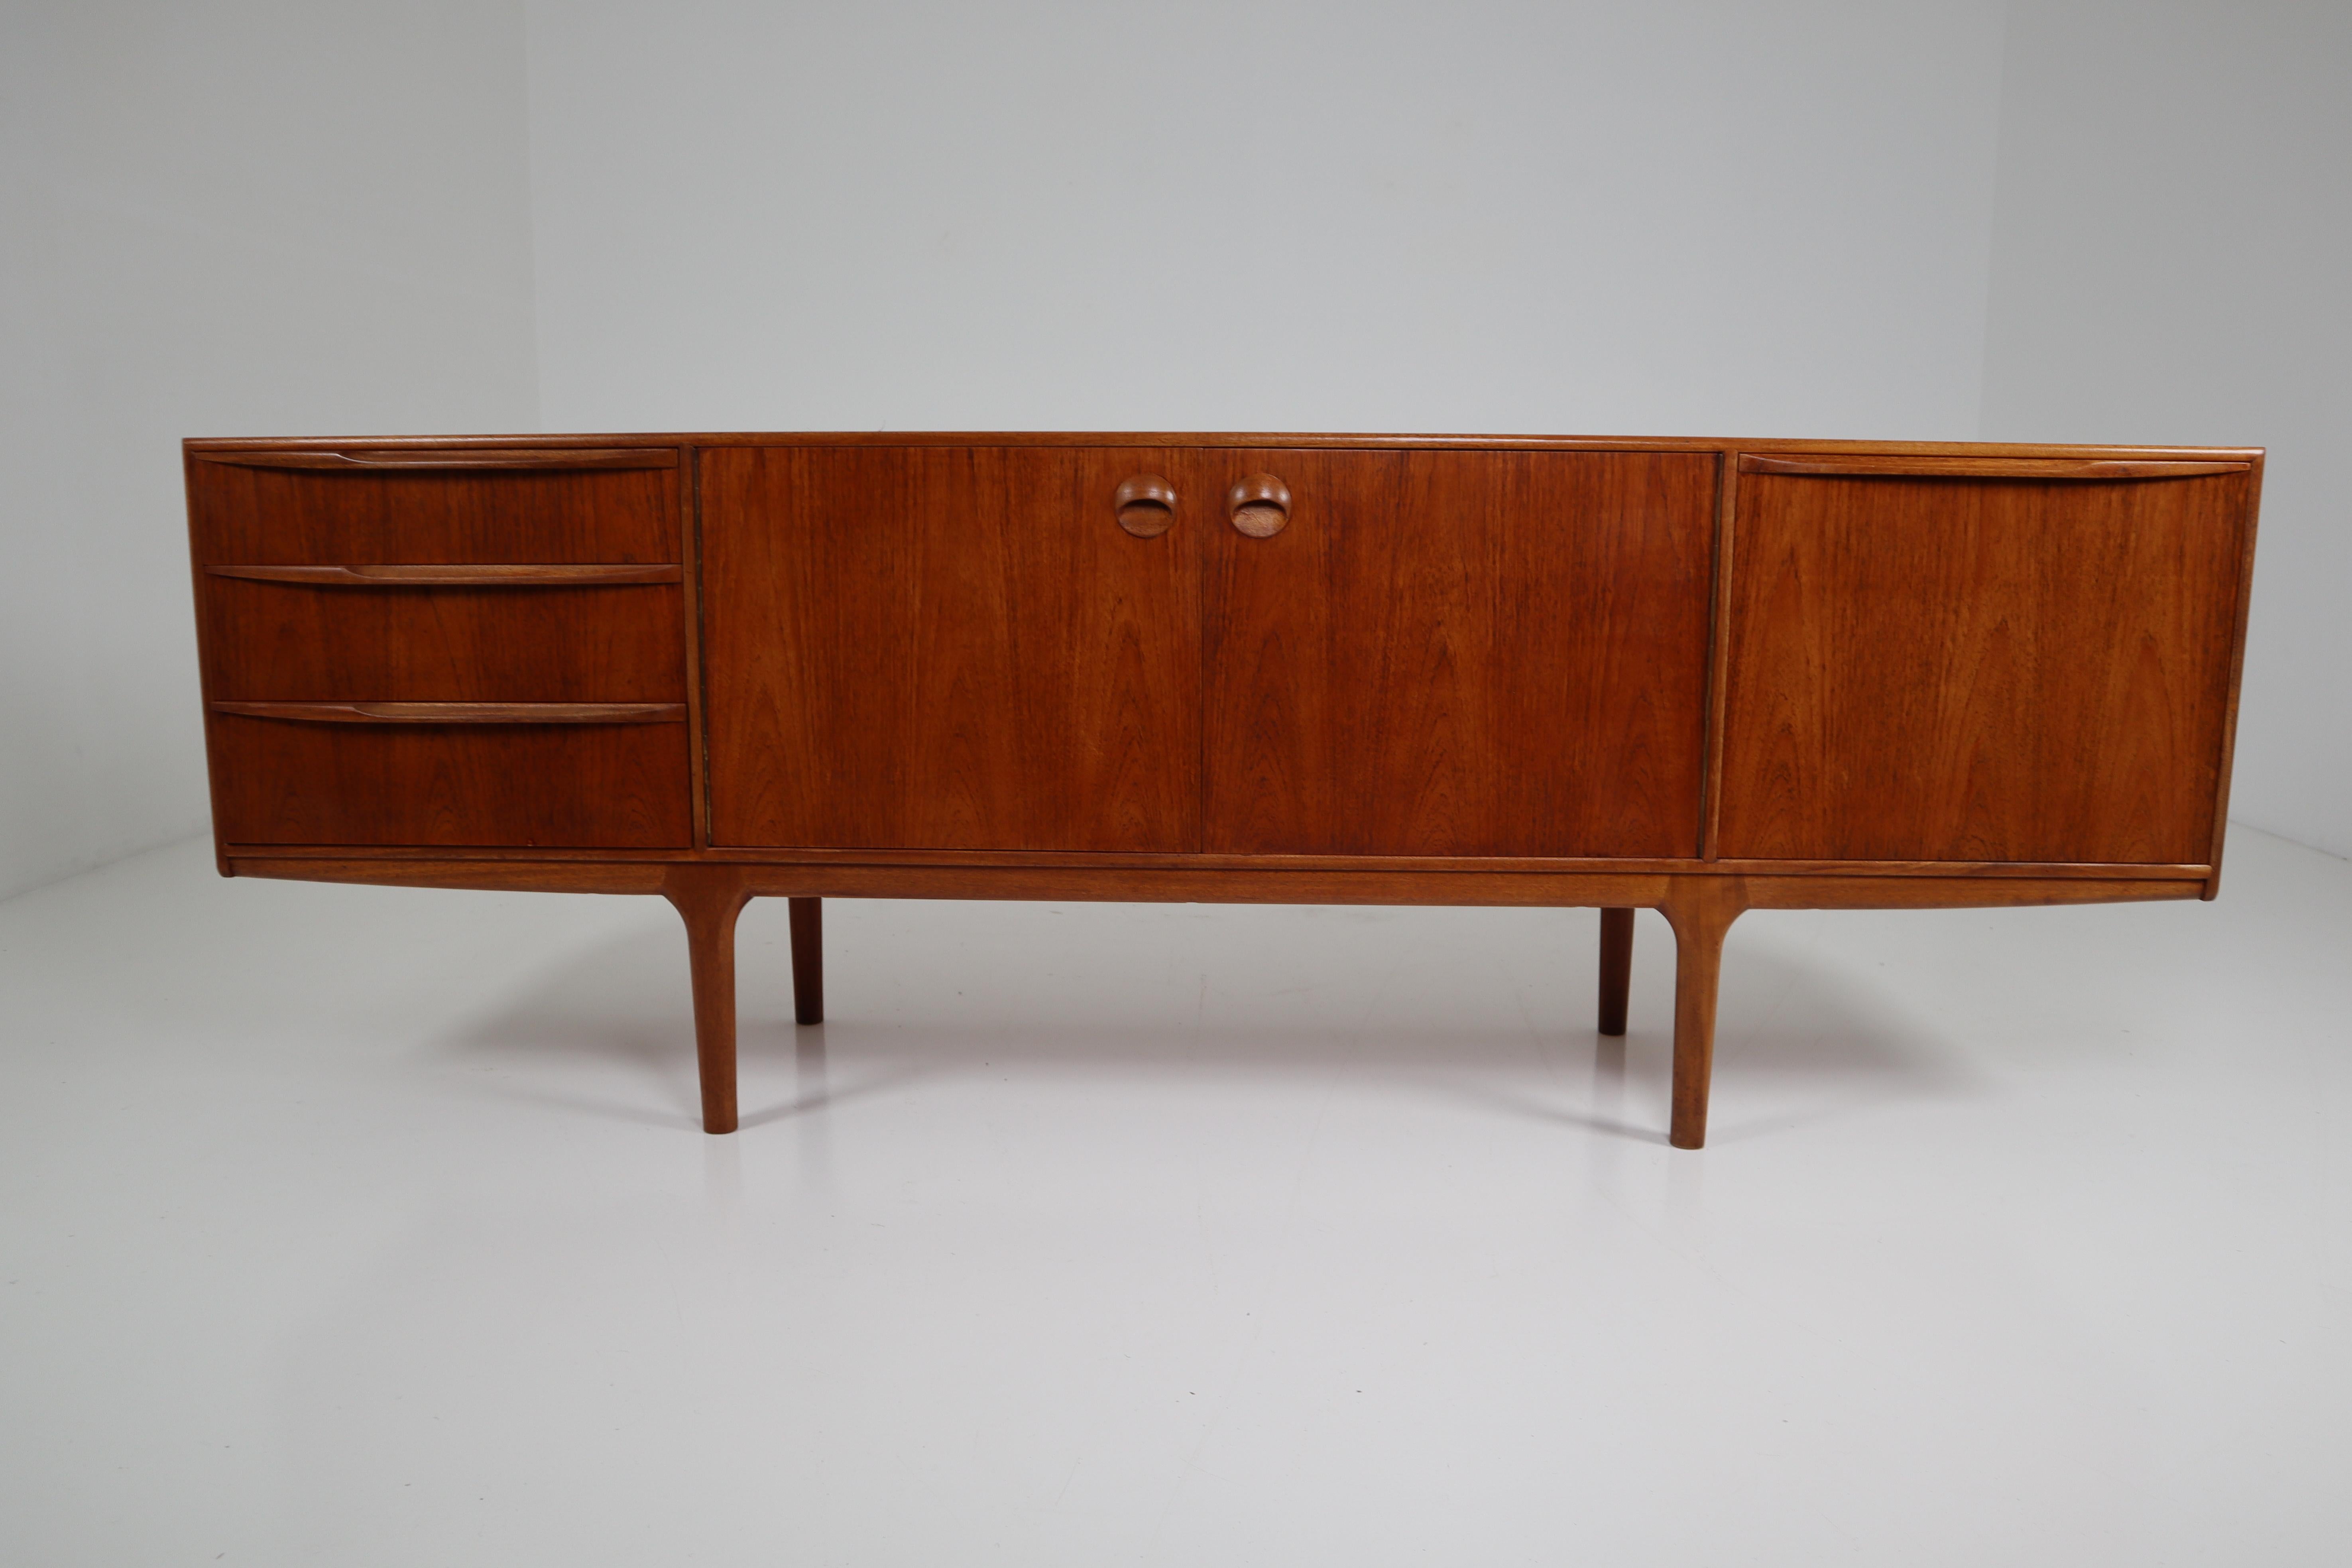 This beautiful vintage modern sideboard features plenty of room for storage within its three drawers and two large storage compartments hidden by cabinet doors. Sleek two-tone design with unique carved pulls and tapered legs adding to the allure.